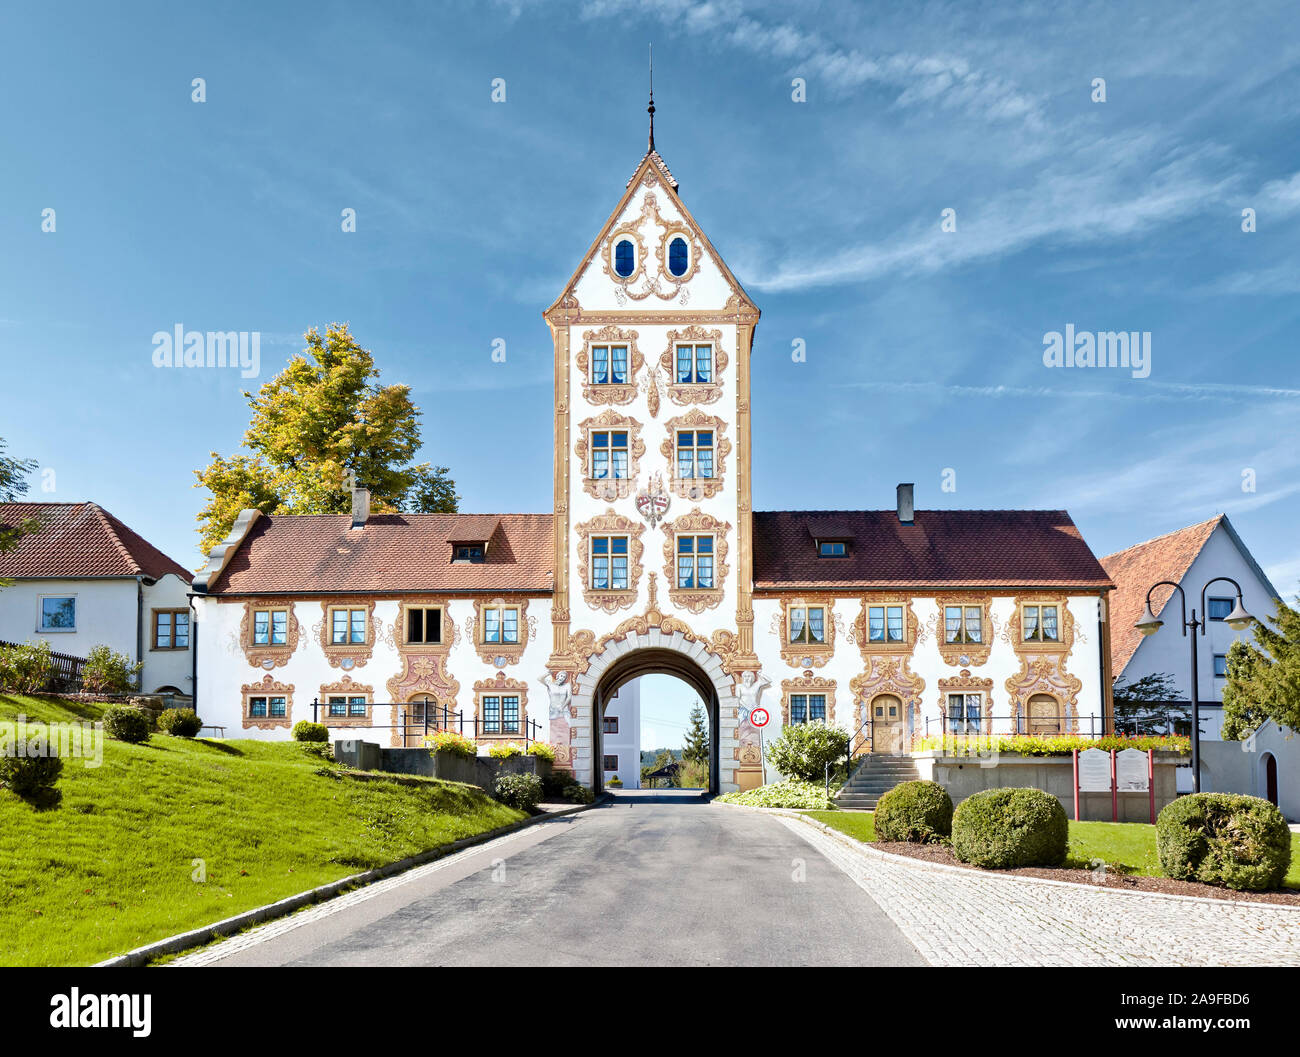 An image of a beautiful painted building in 'Rot an der Rot' Stock Photo